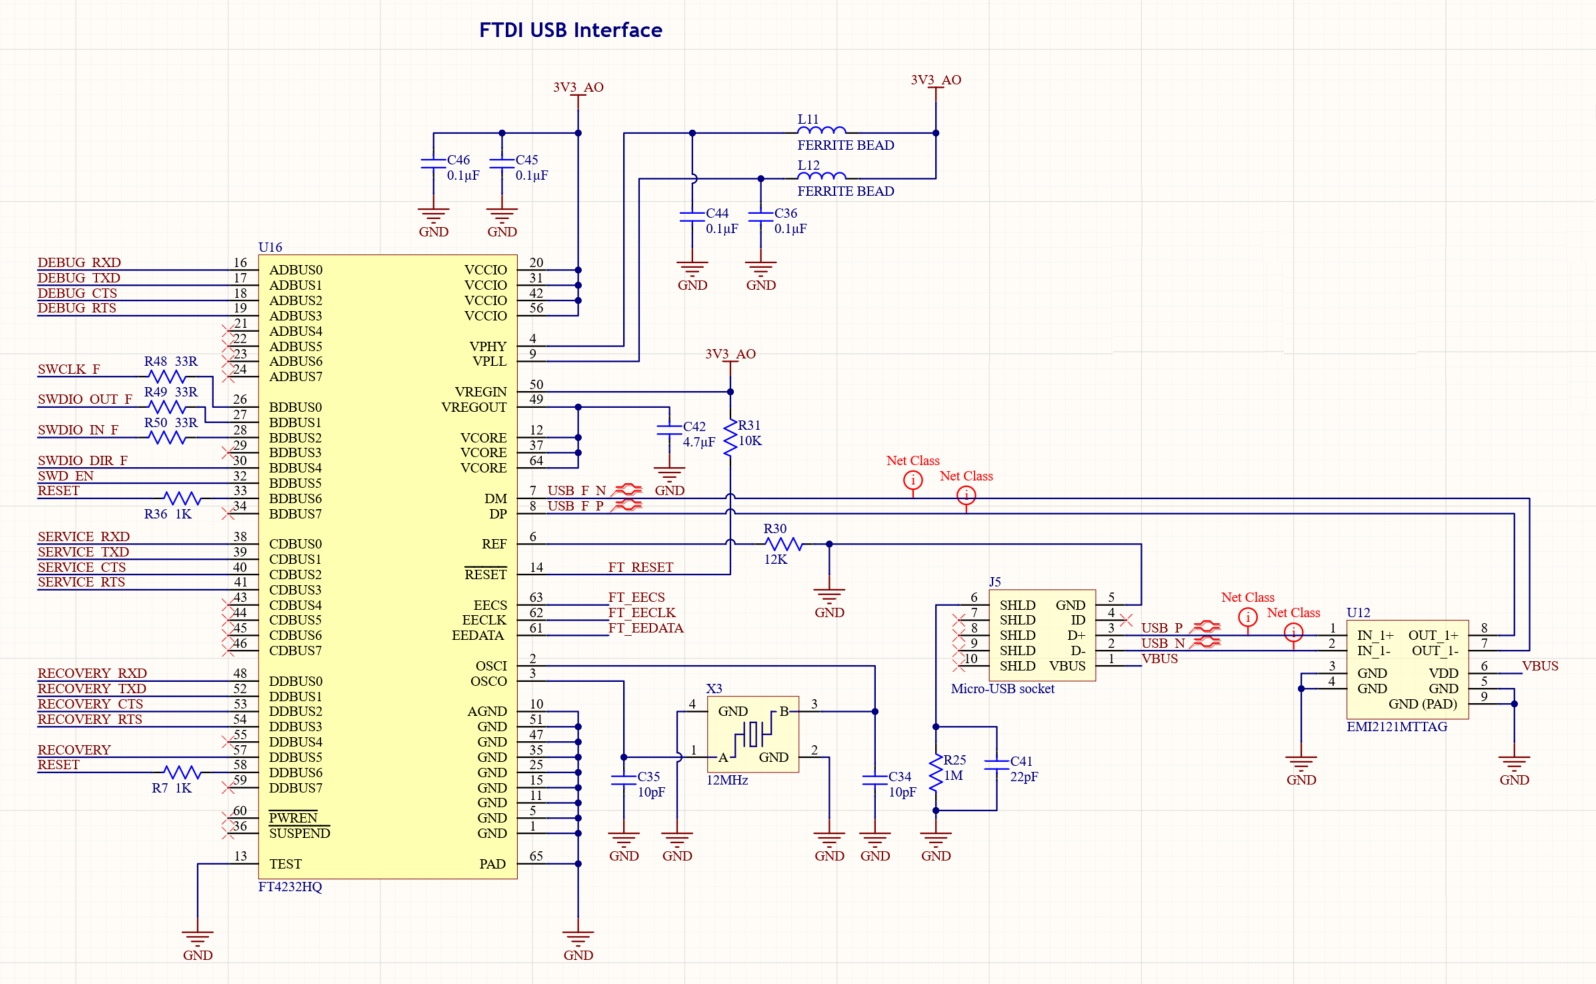 schematic to support FTDI chip